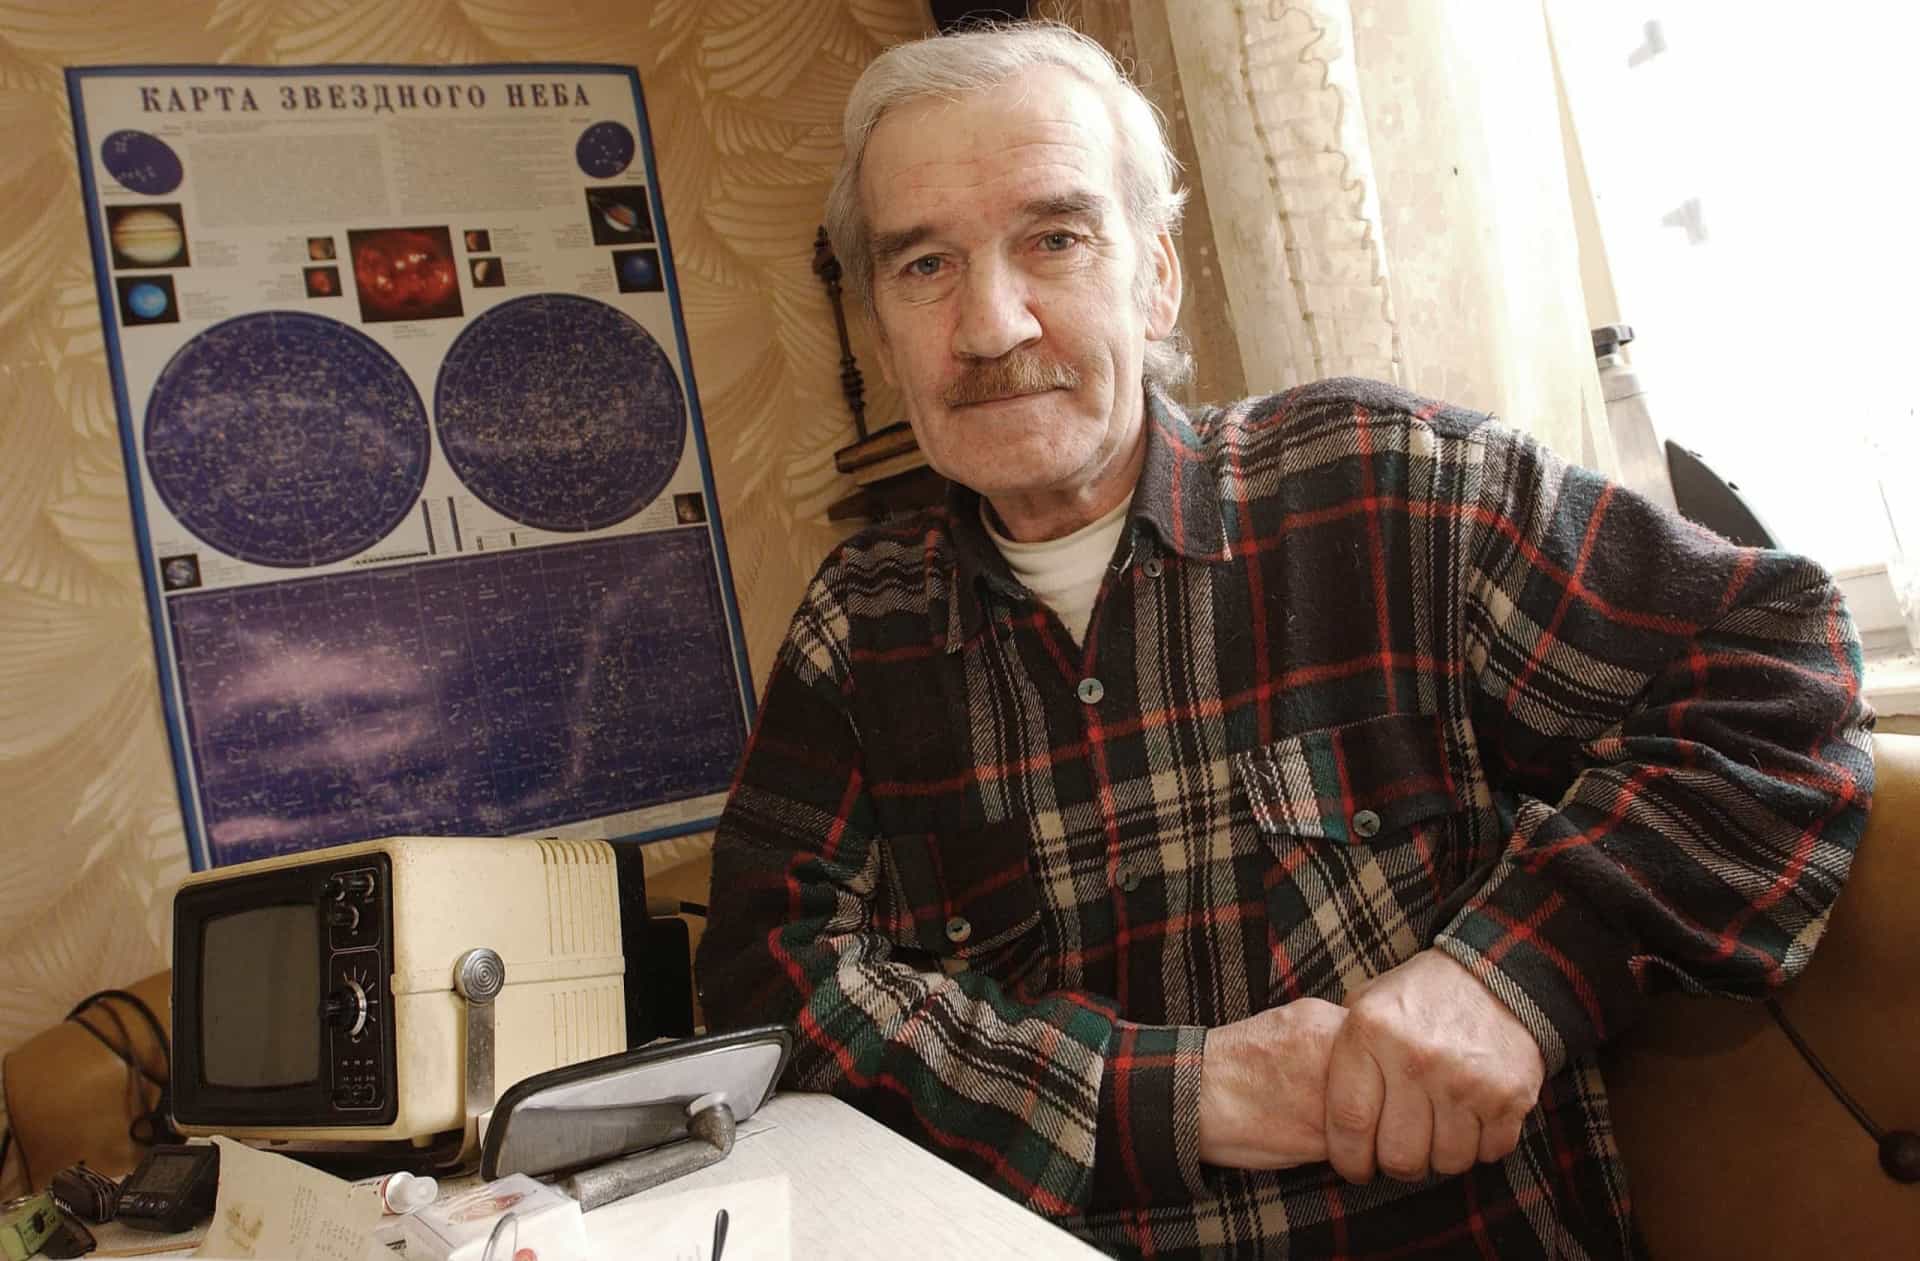 <p>Stanislav Petrov was in charge of Soviet nuclear early warning systems on the night of September 26, 1983, when a false "missile attack" signal appeared to show a US nuclear launch. He decided not to retaliate. Petrov is feted by nuclear activists as another Russian official who "saved the world," this time by determining that the Soviet system had been spoofed by a reflection off the earth.</p>